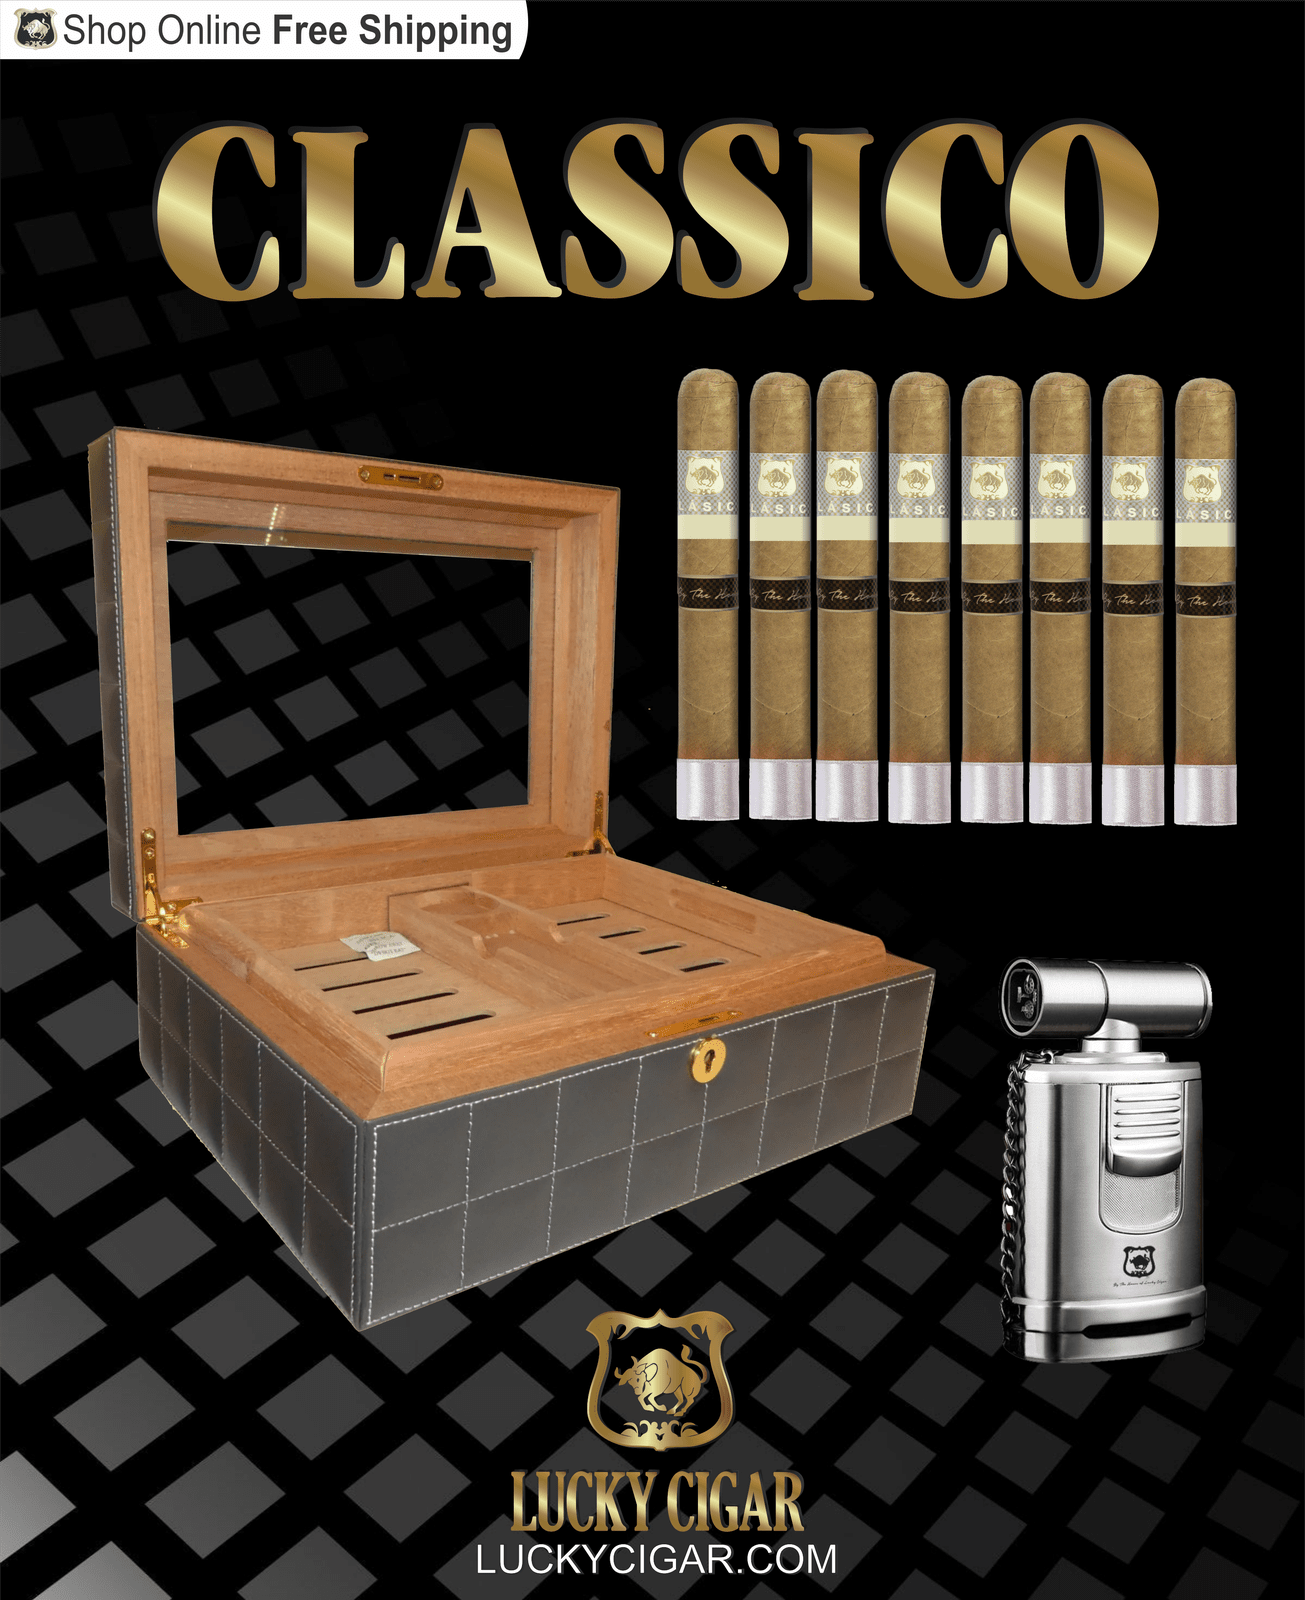 Lucky Cigar Sampler Sets: Set of 8 Classico Toro Cigars with Desk Humidor, Table Torch